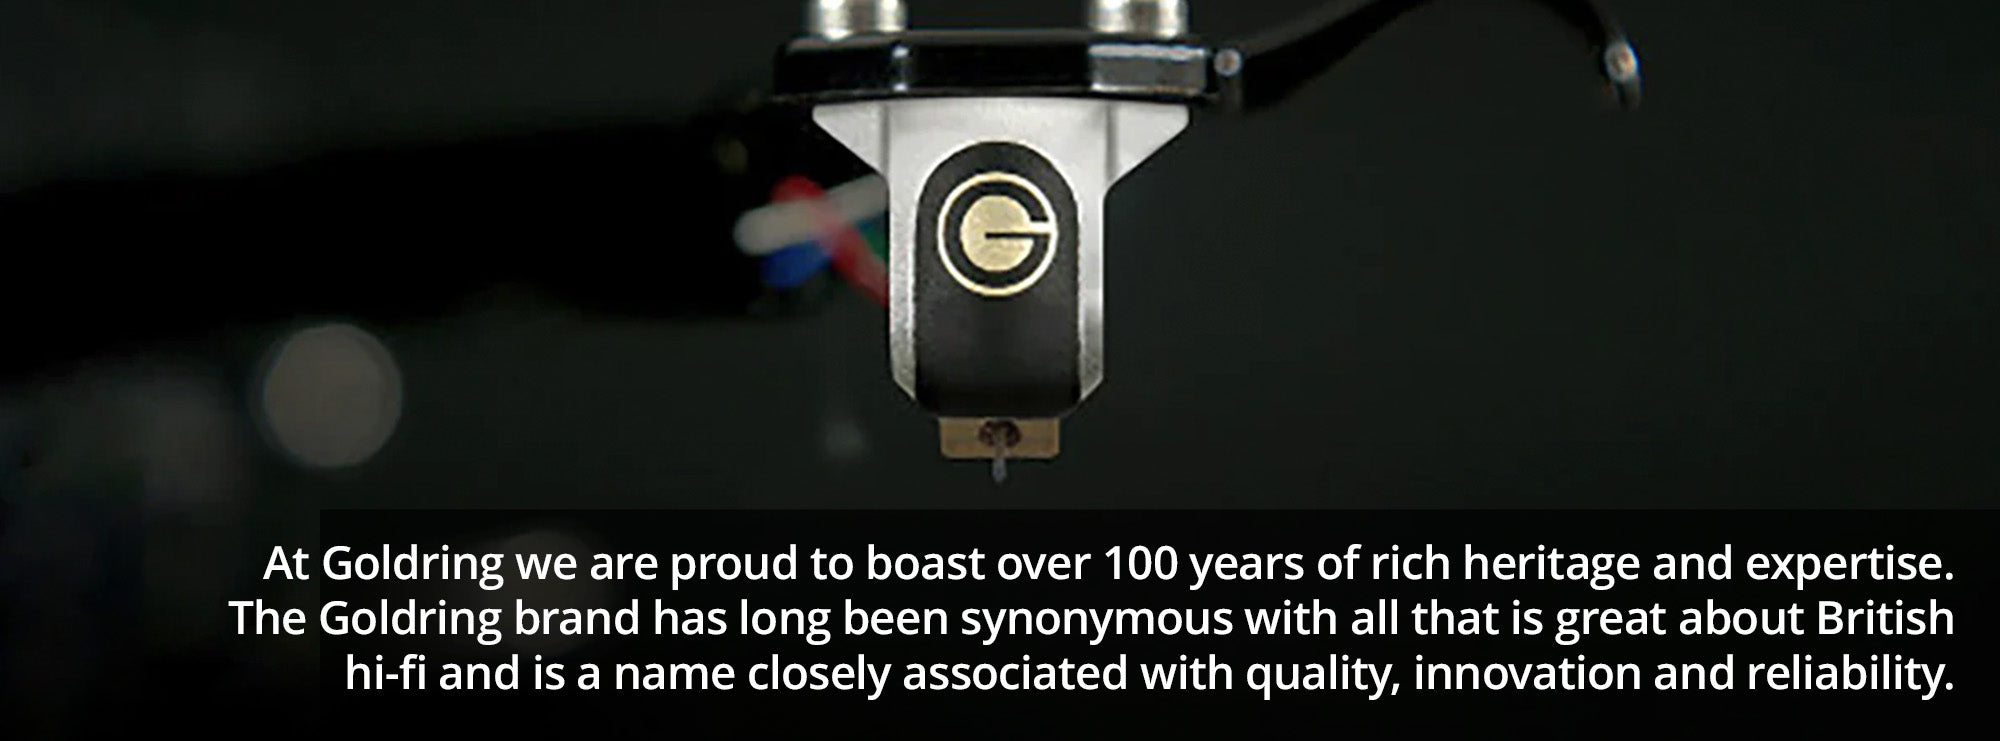 At Goldring we are proud to boast over 100 years of rich heritage and expertise. The Goldring brand has long been synonymous with all that is great about British hi-fi and is a name closely associated with quality, innovation and reliability.